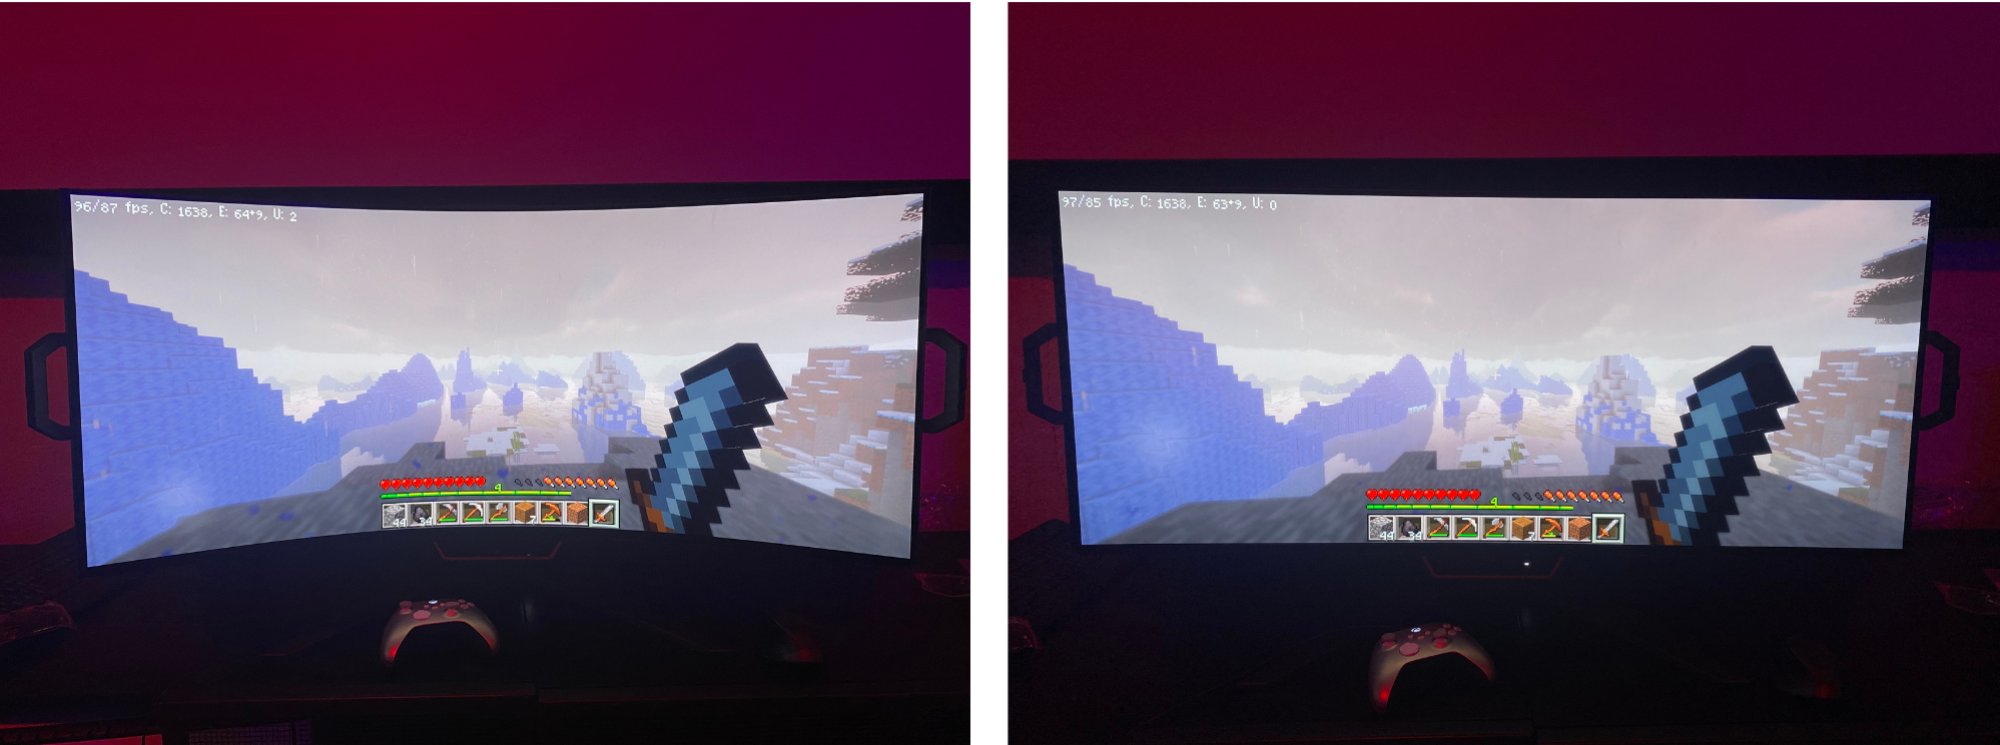 side by side of game on curved monitor and flat monitor